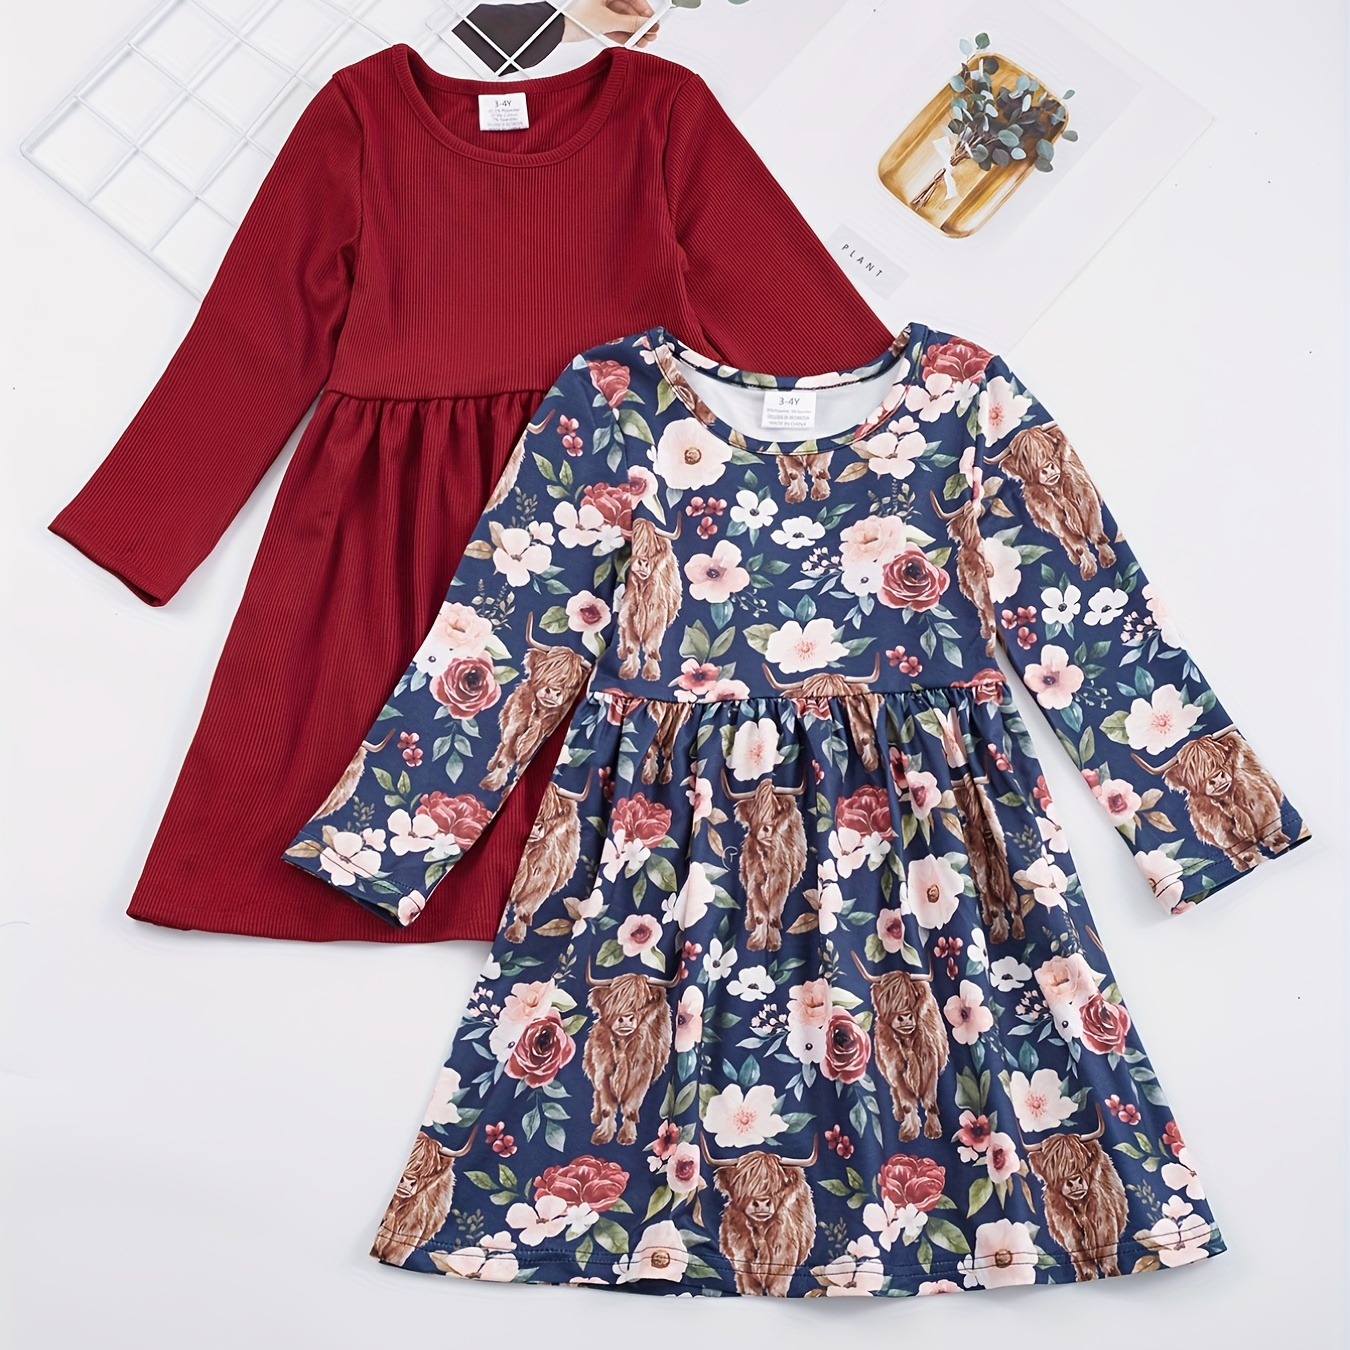 

2pcs Toddler Girls' Western Style Solid Ribbed Dresses Set Plain Color Floral Cow Print Comfy Long Sleeve A-line Dress Outfit